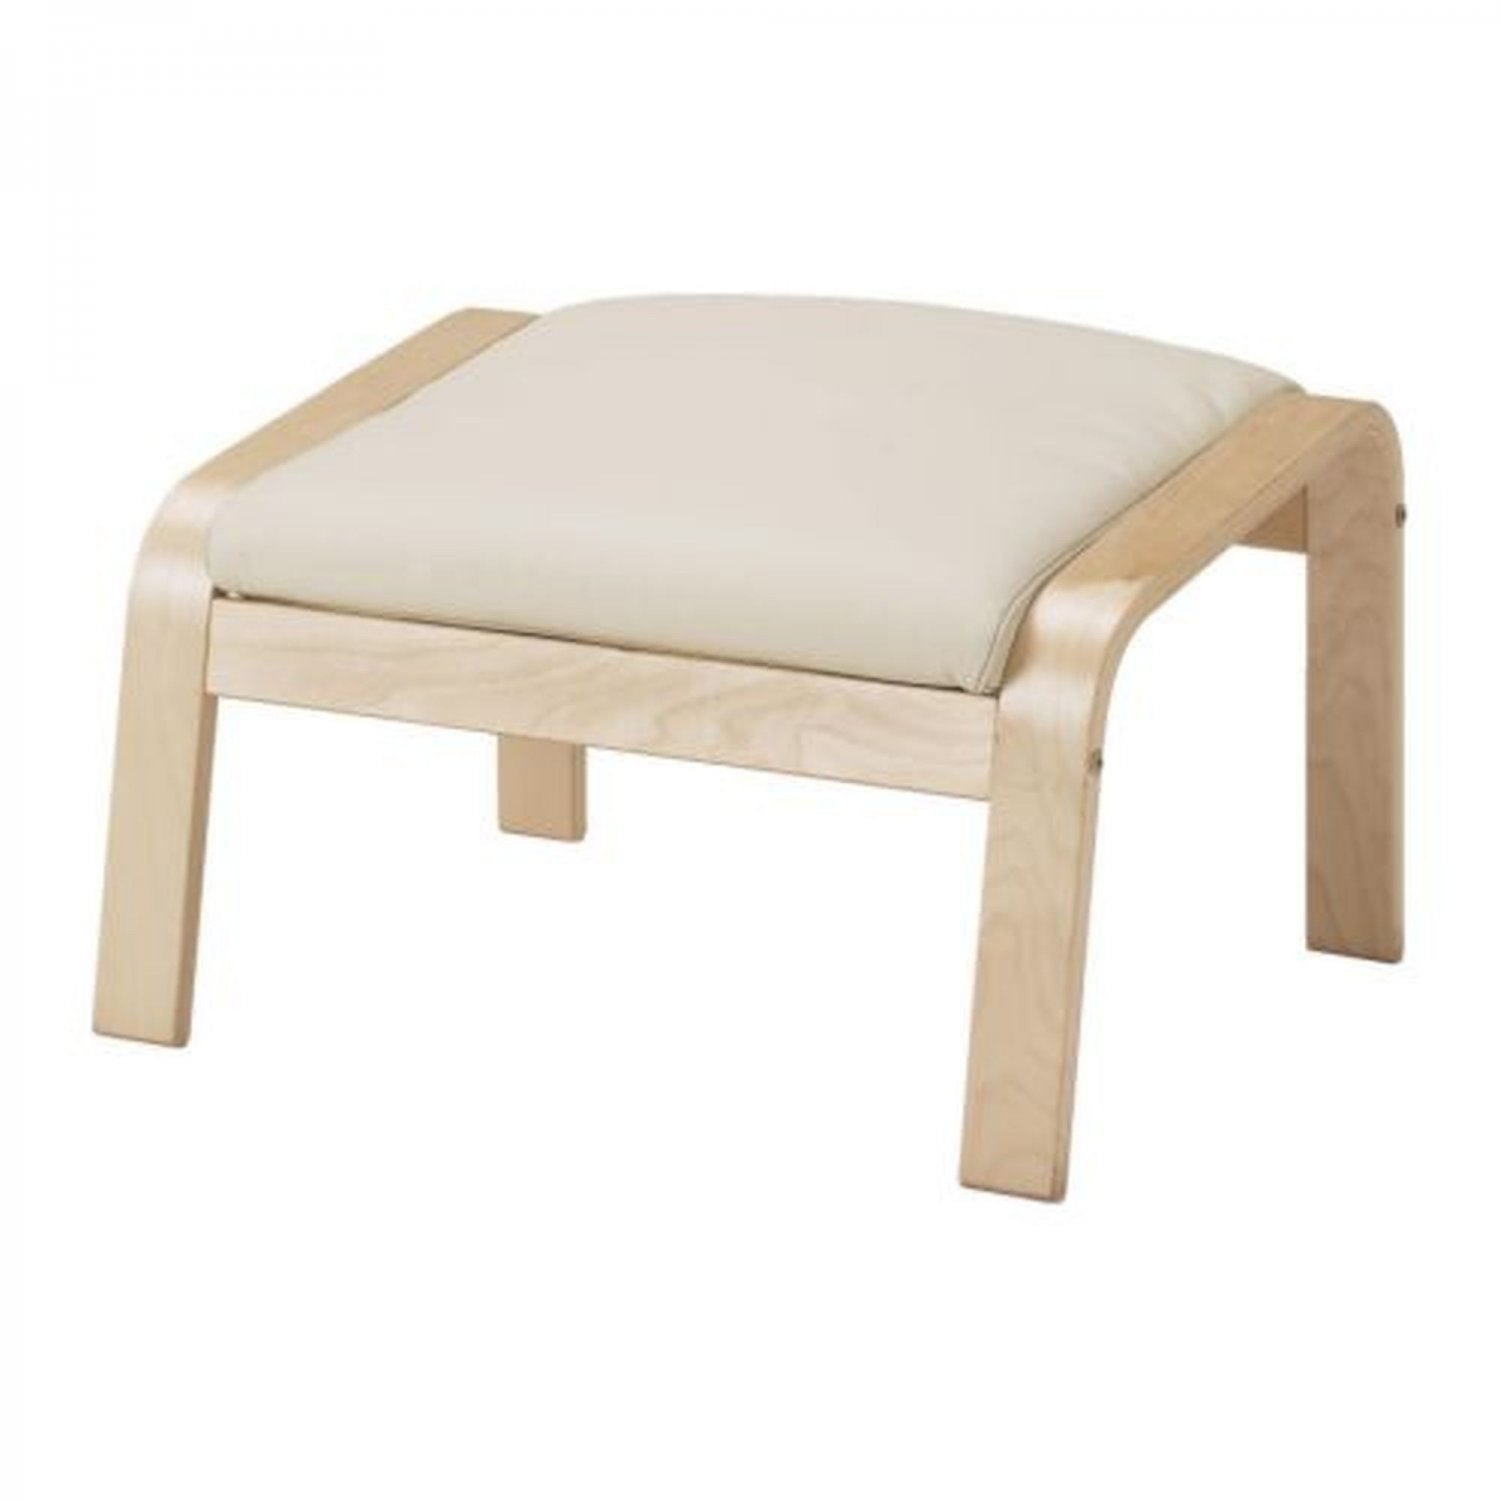 IKEA Poang LEATHER Footstool CUSHION ROBUST GLOSE OFF-WHITE Ottoman